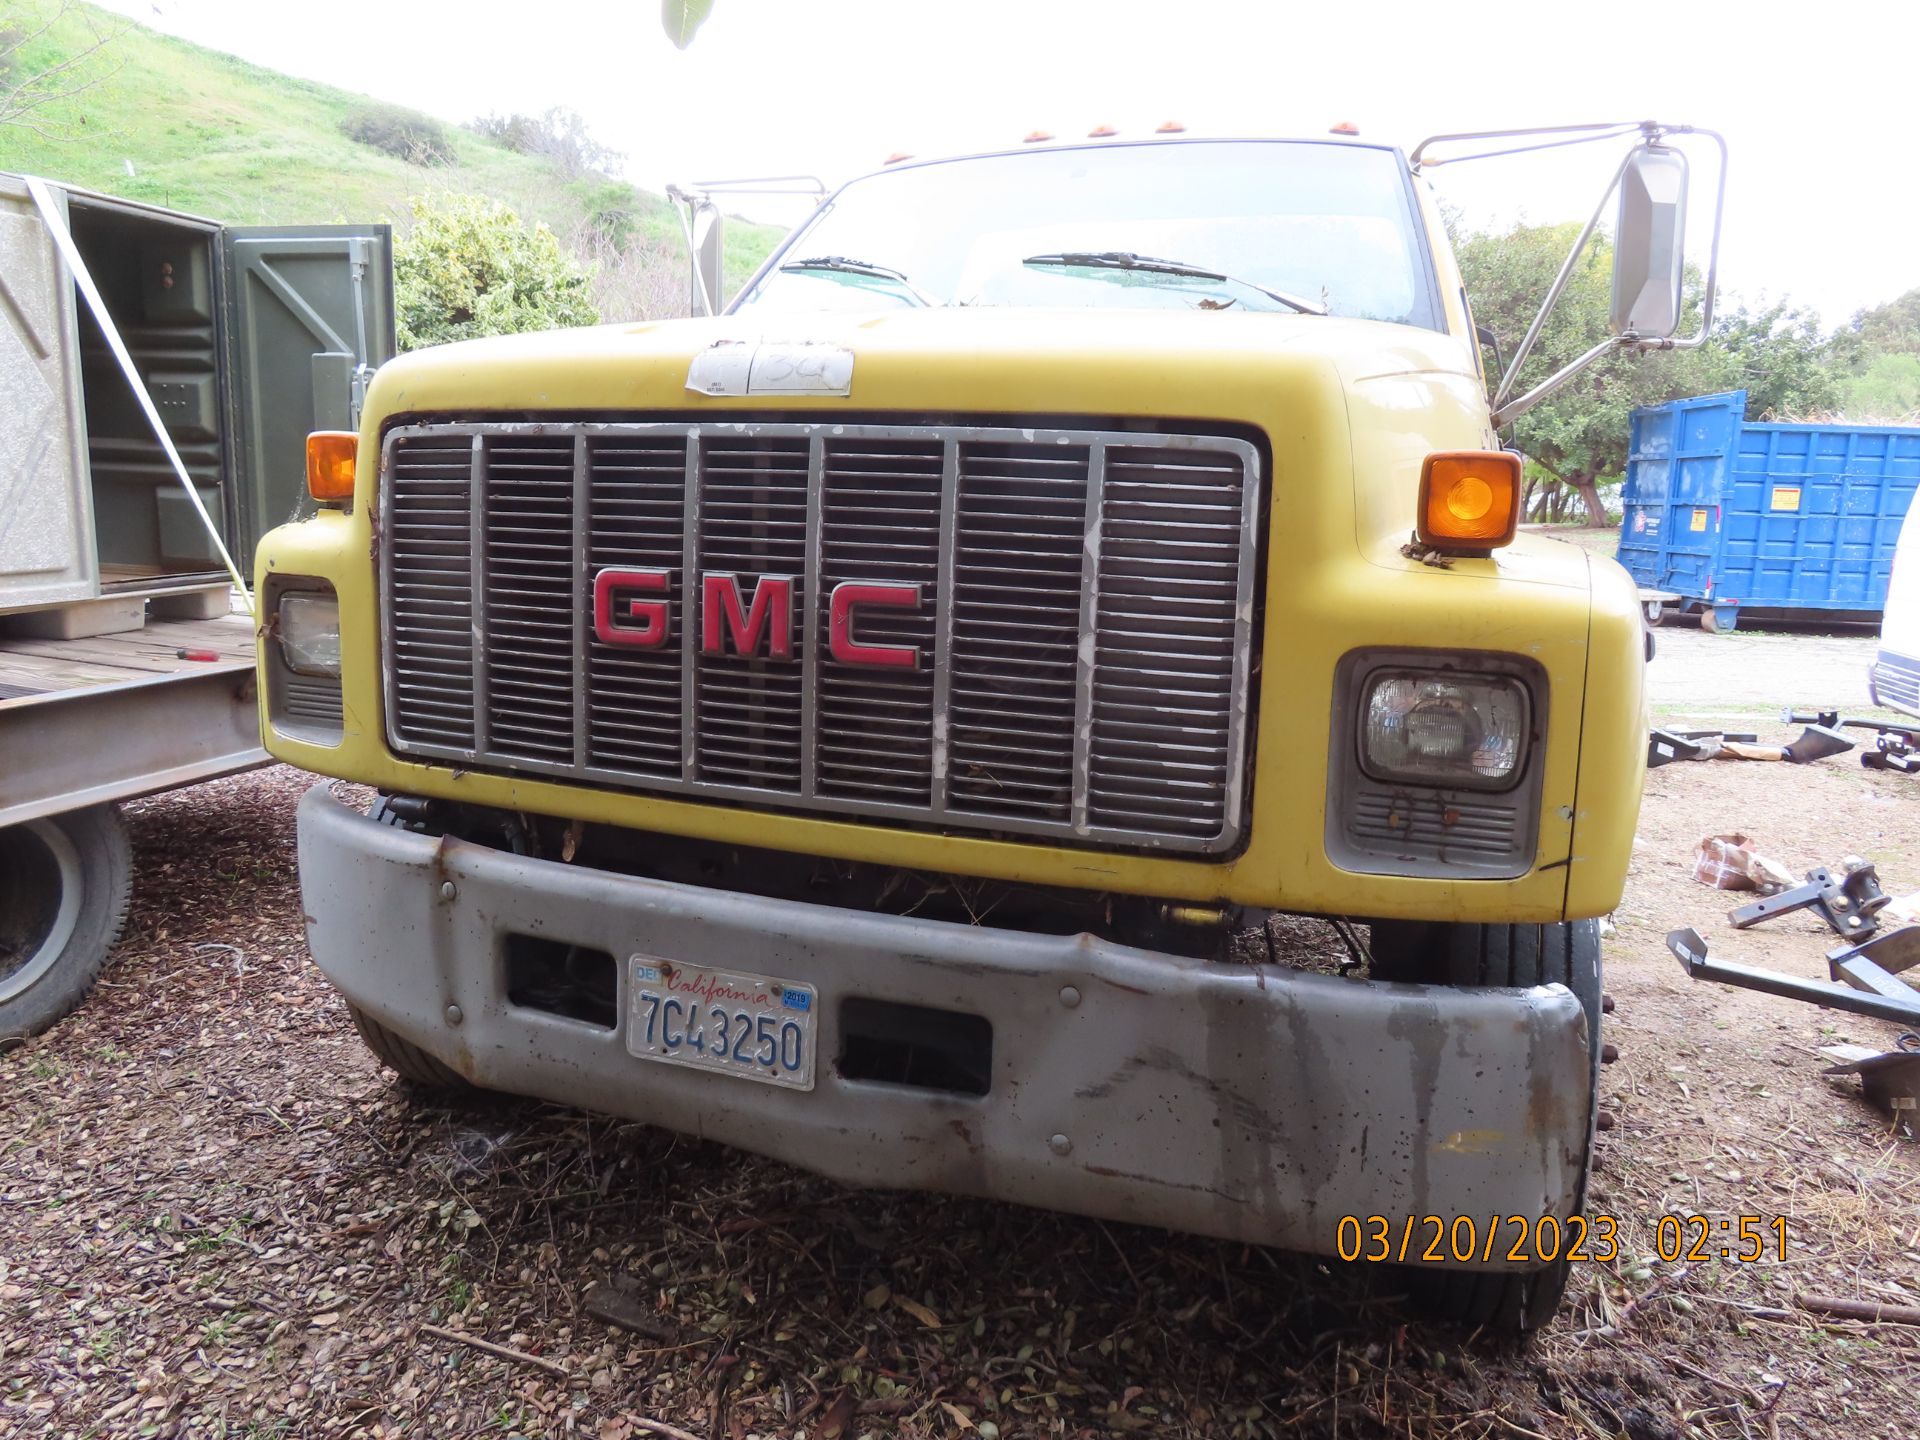 (1994) GMC Truck (No Bed) - Image 2 of 4